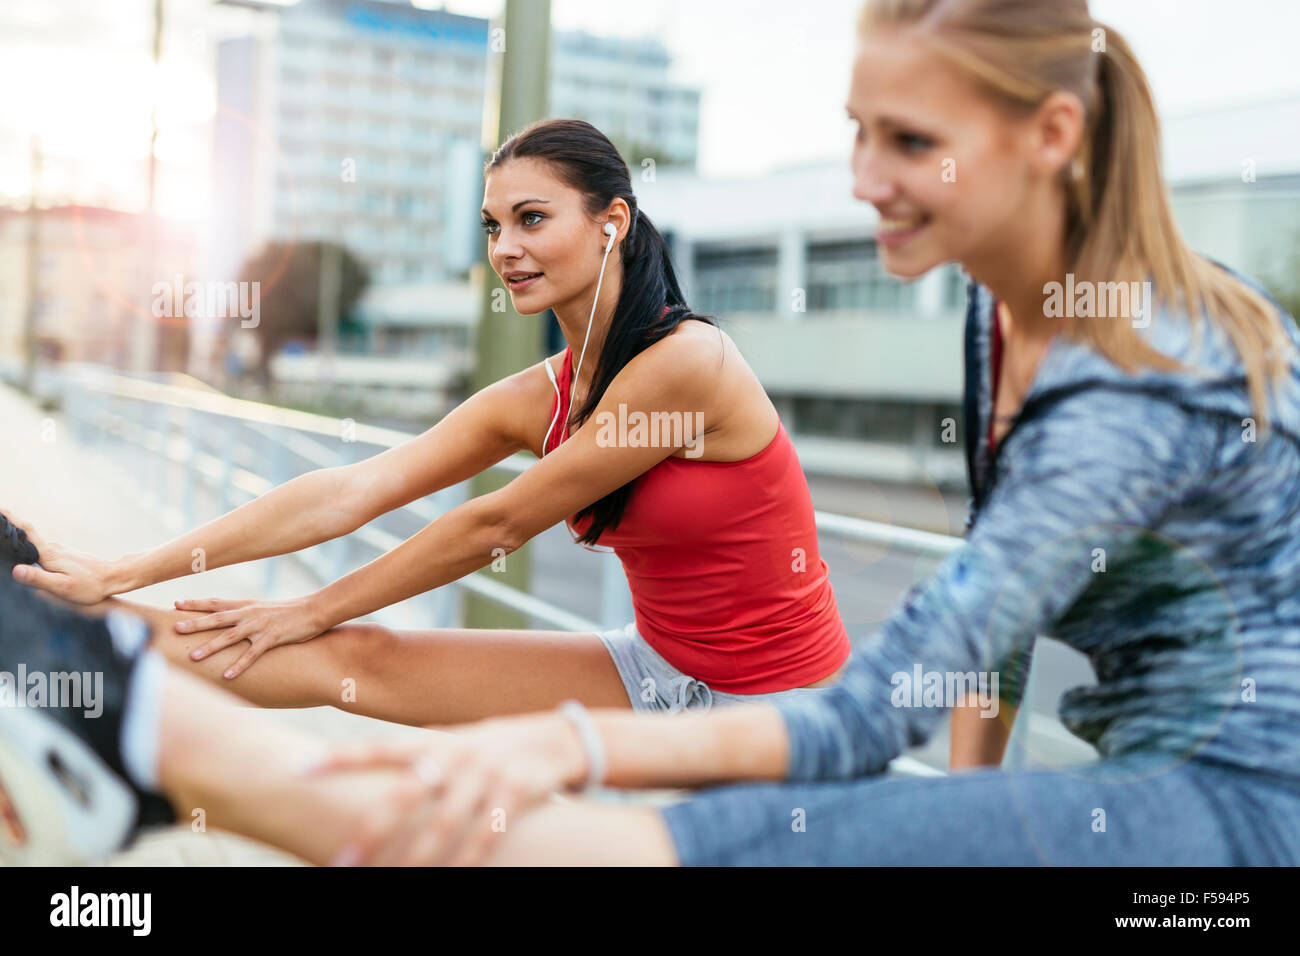 Warming up for jogging by stretching feet muscle Stock Photo